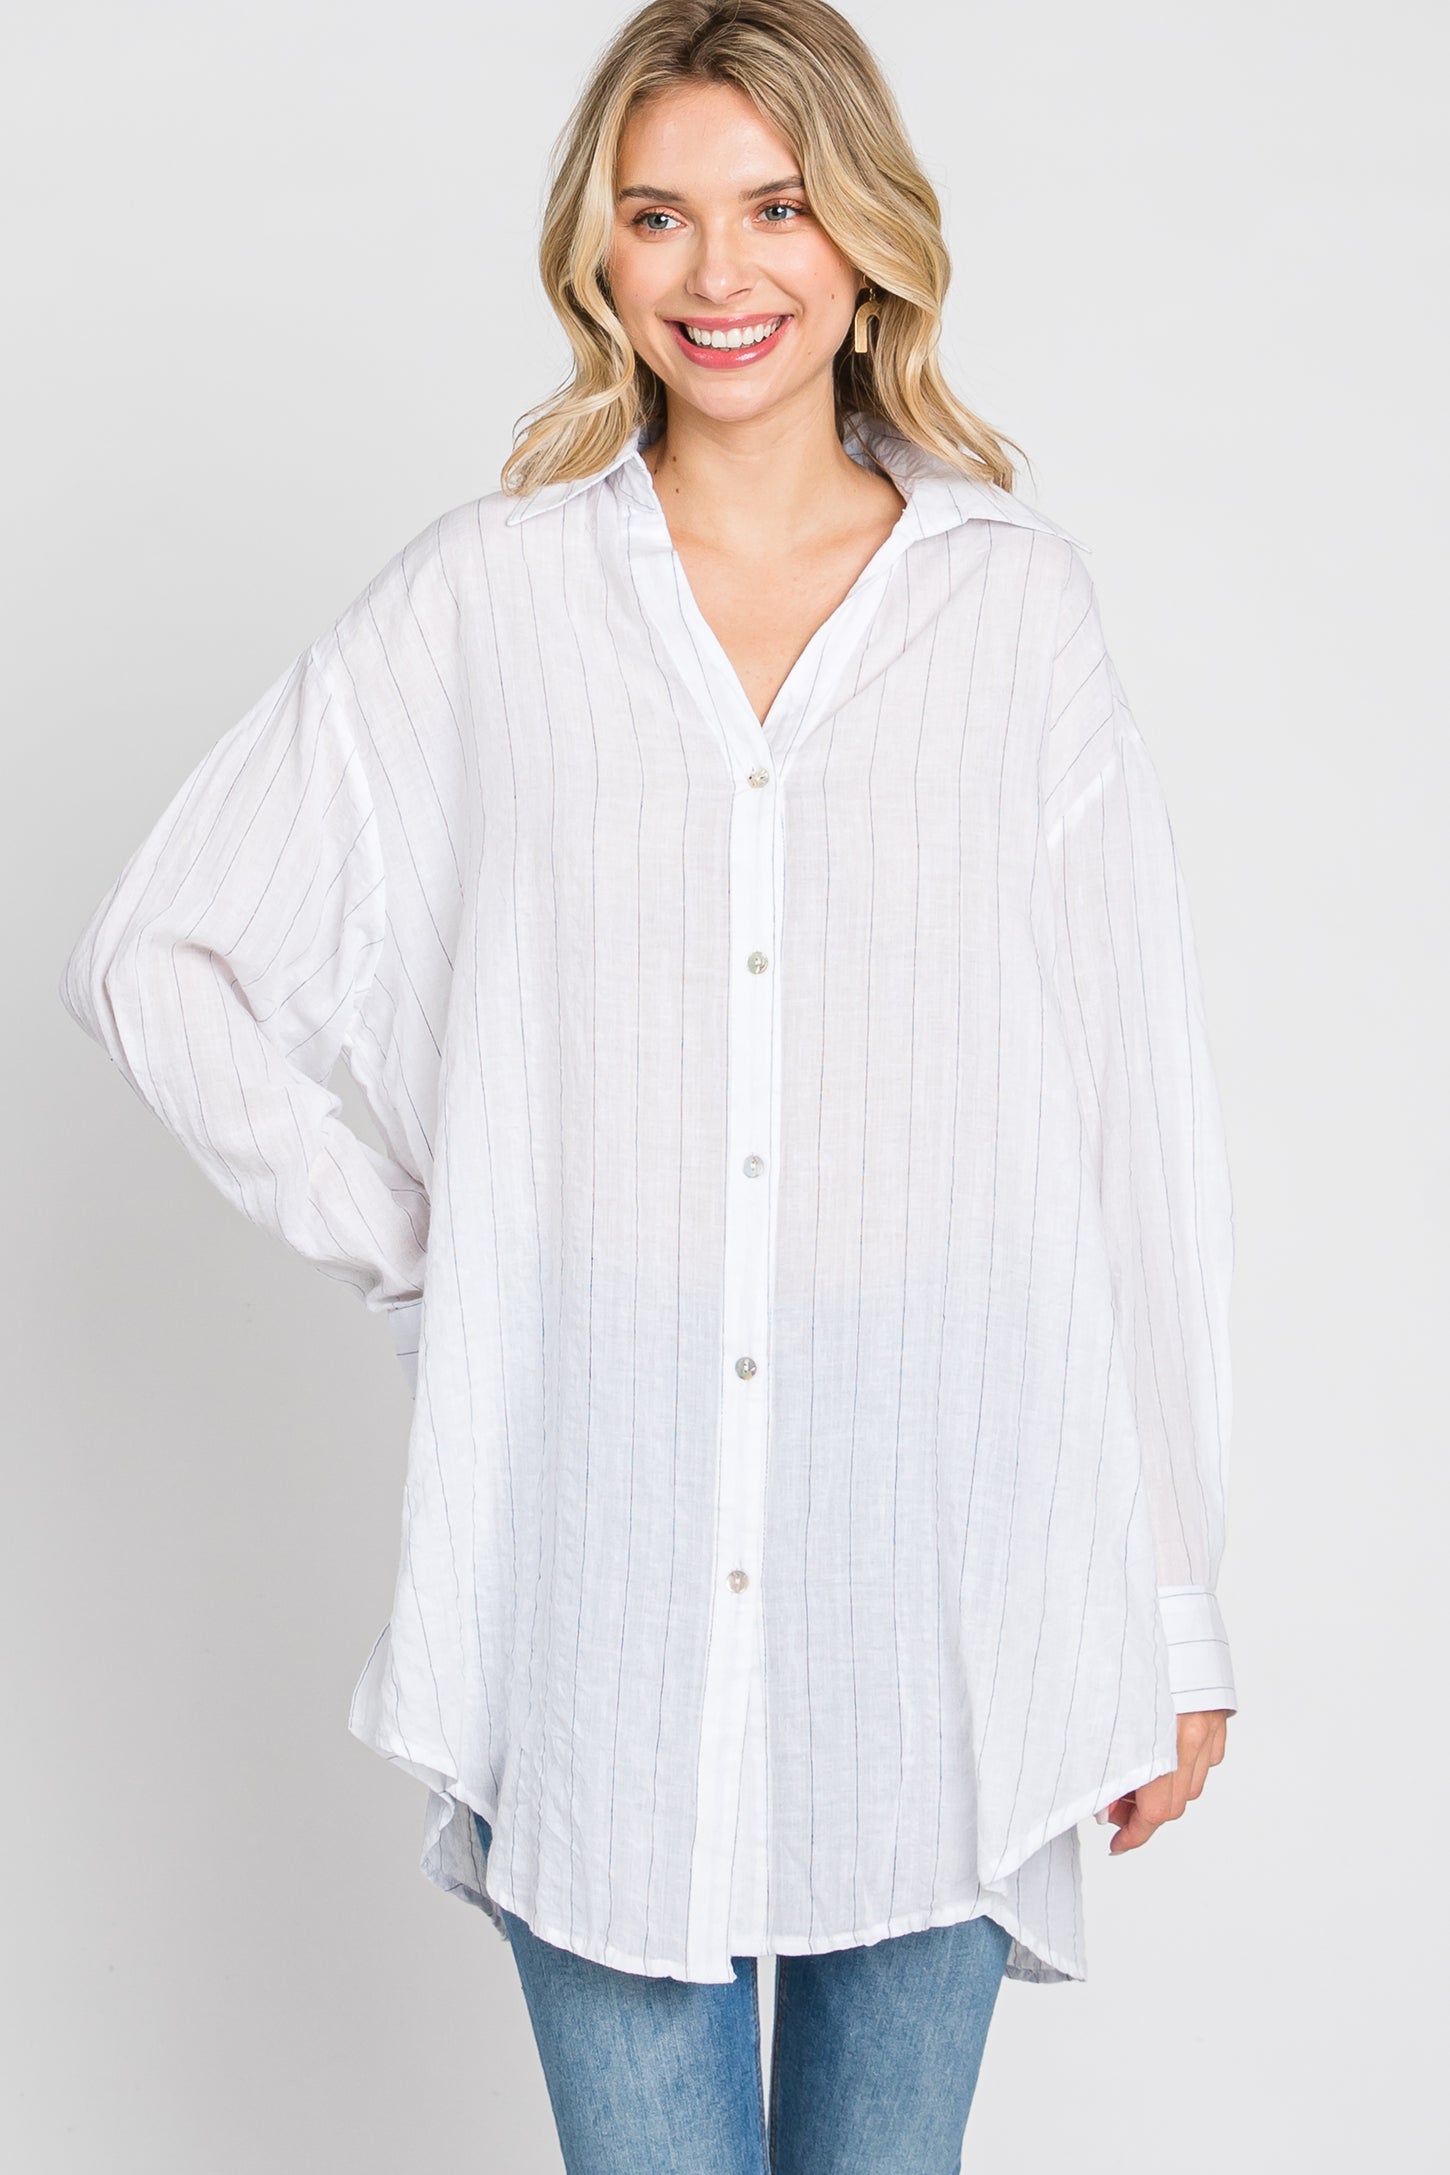 White Striped Button Up Top